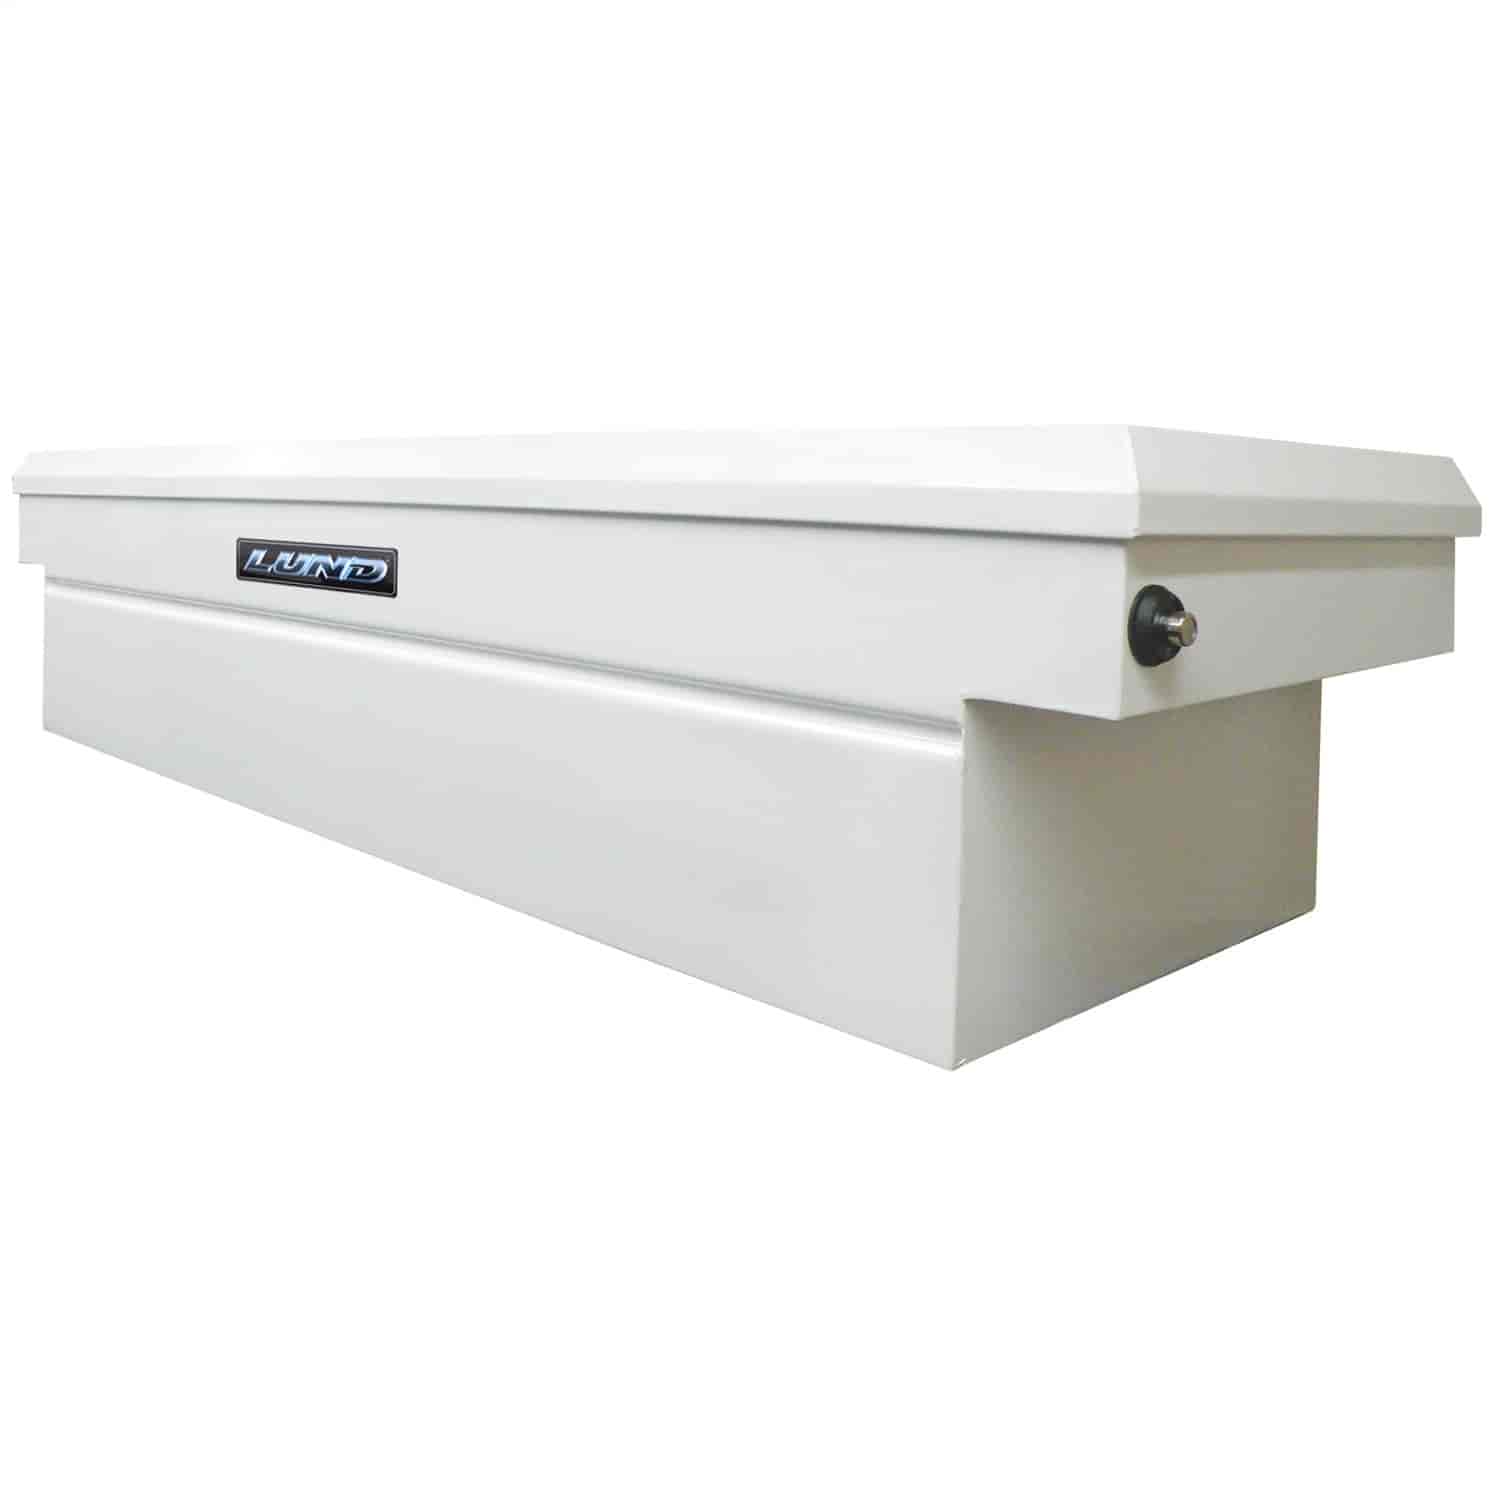 PRO HD Steel Bed Rail Tool Box Length: 70.50" Width: 21" Height: 9.75" White Finish